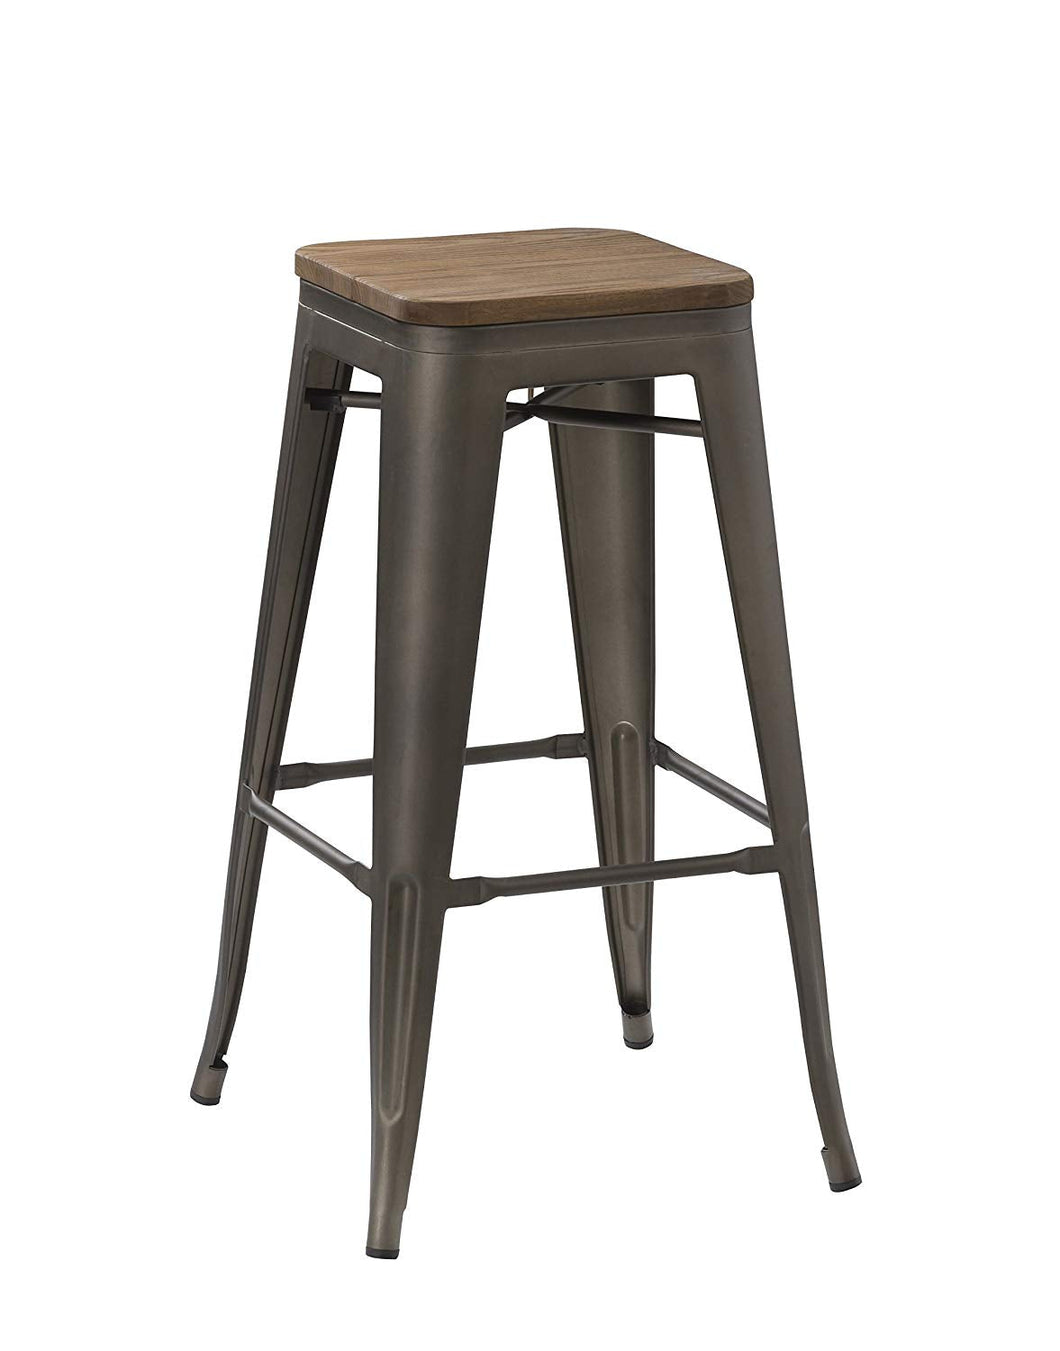 BTEXPERT Modern 30 inch Solid Steel Stacking Industrial Tabouret Rustic Metal Bar Stool with Wood Top ( barstool)